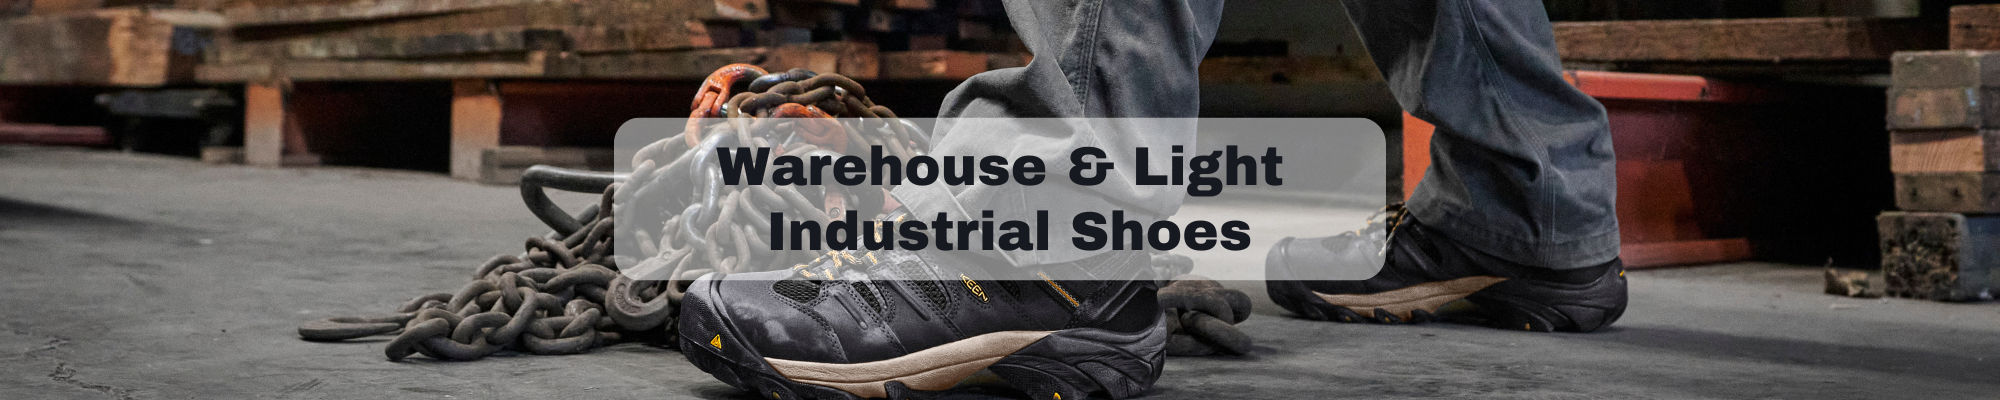 Warehouse Industry Boots